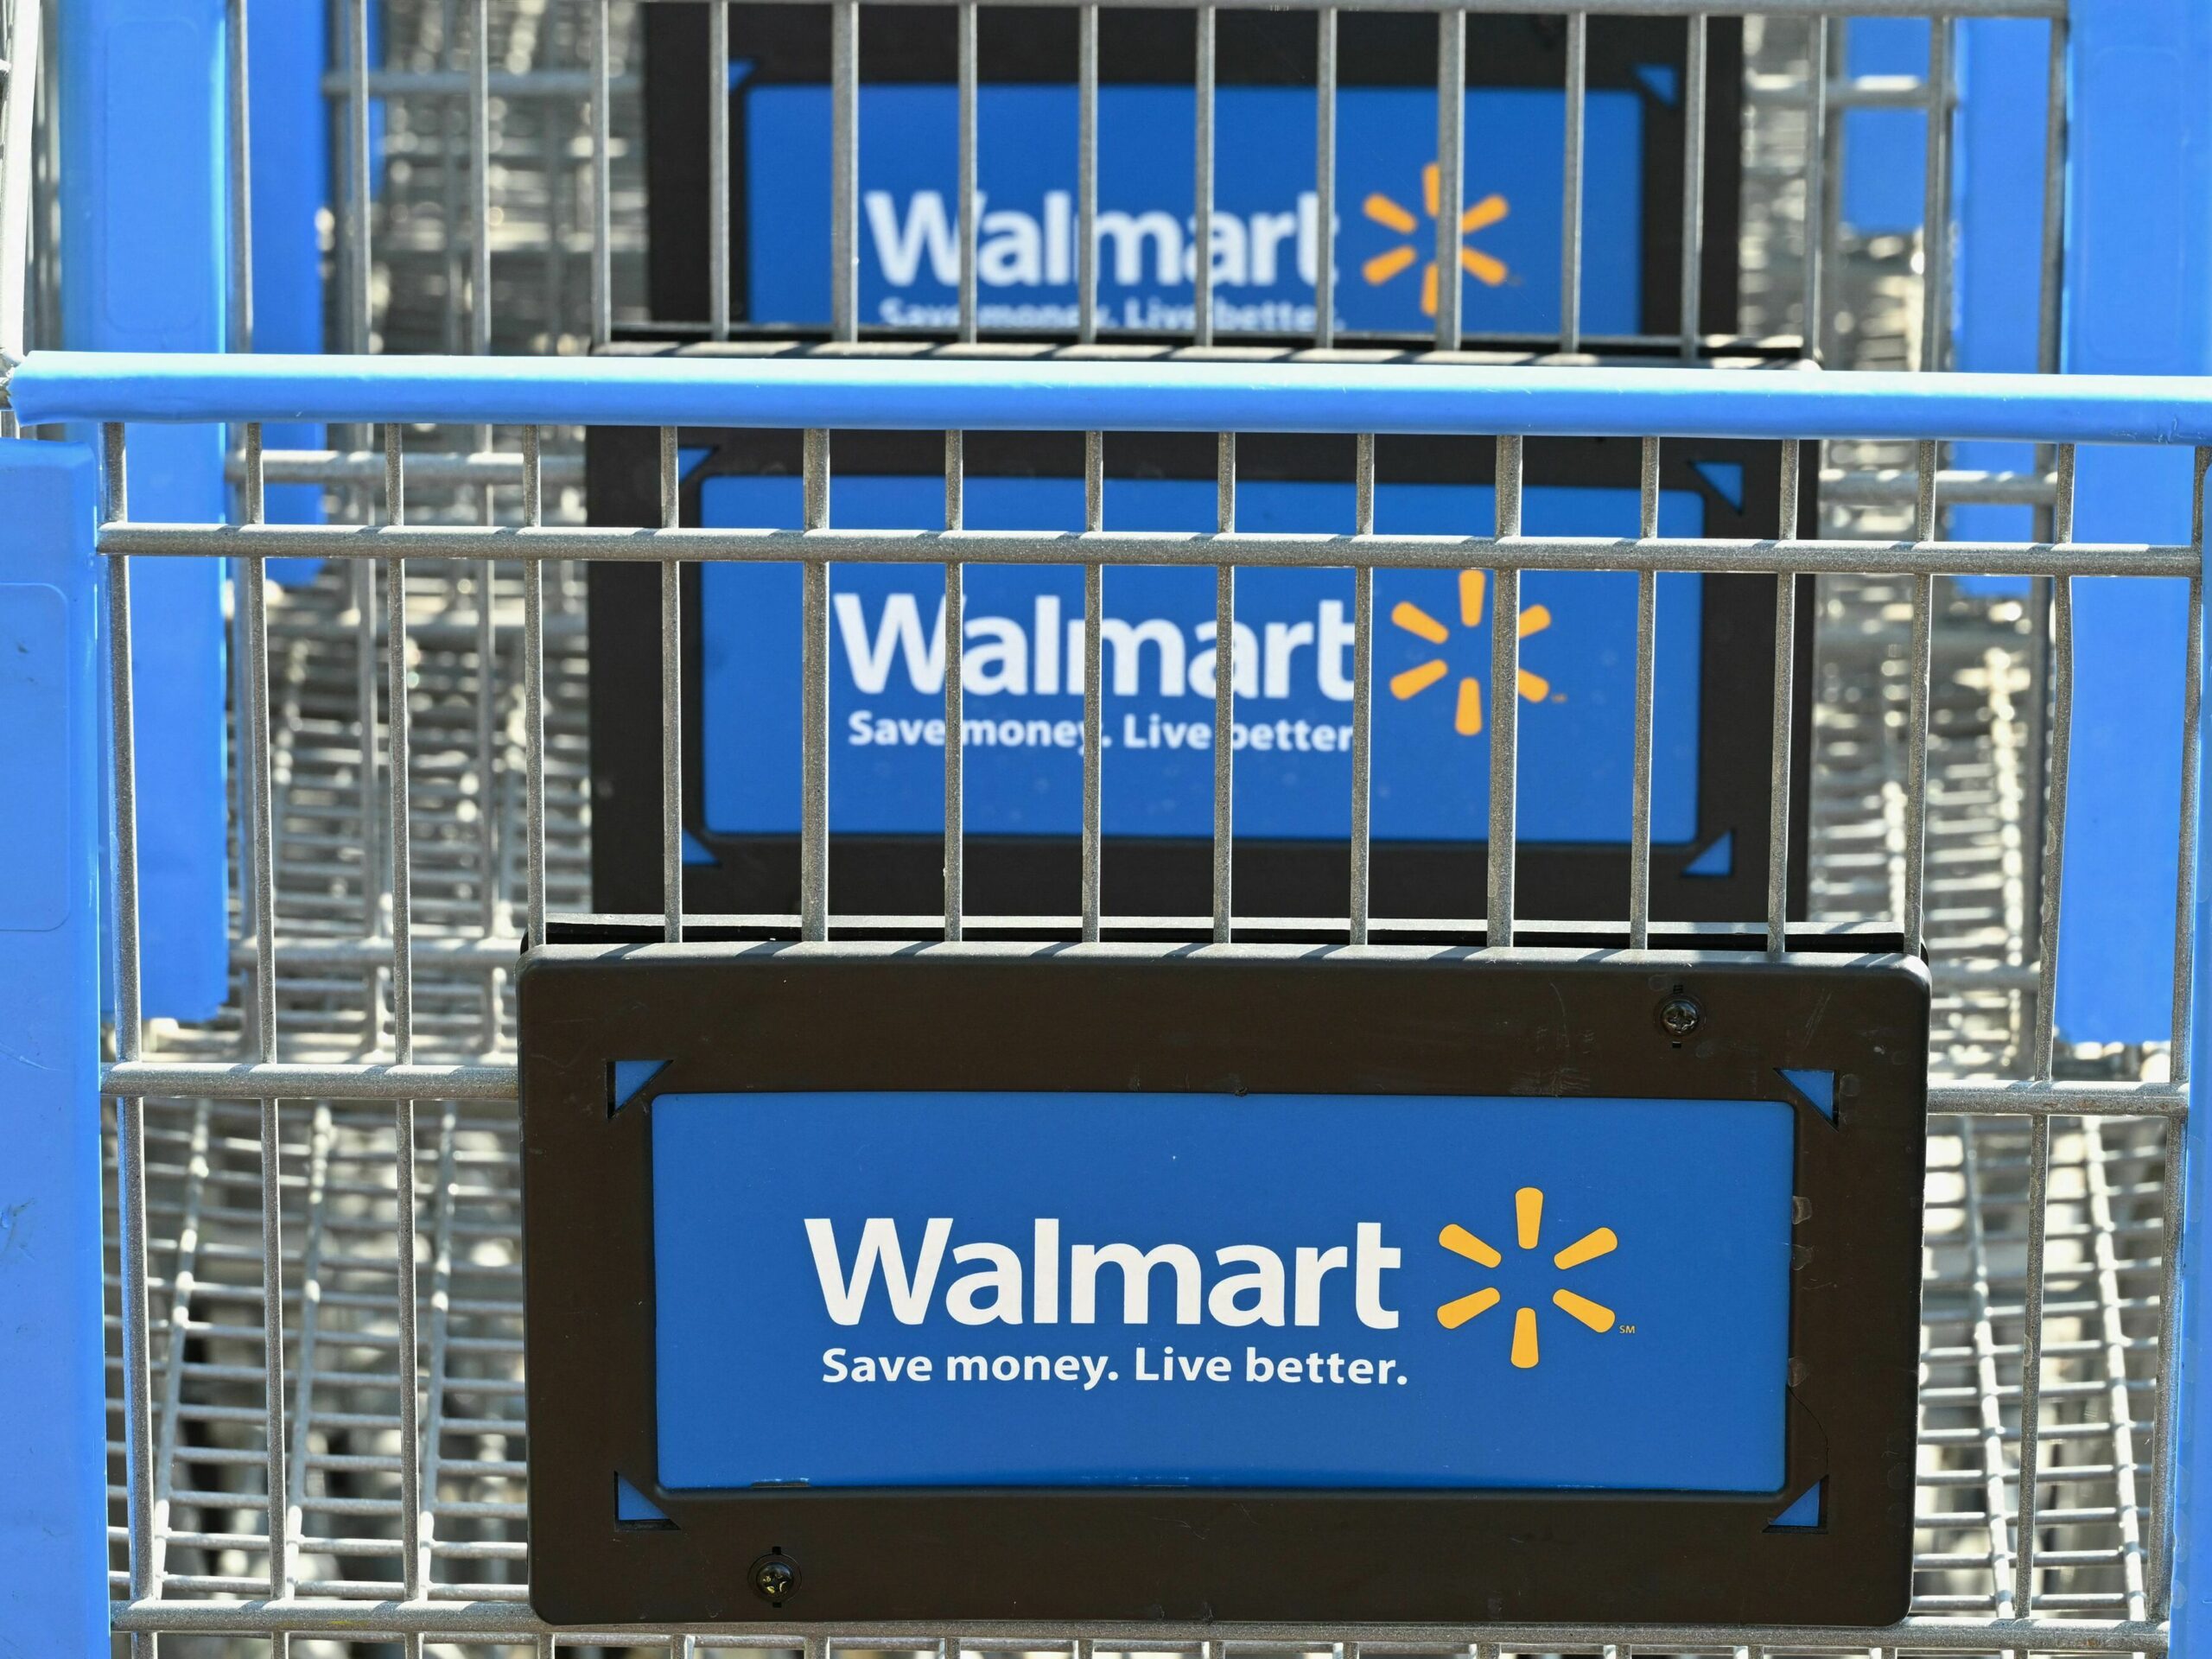 Some Walmart shoppers could get up to $500 in cash from a class-action settlement